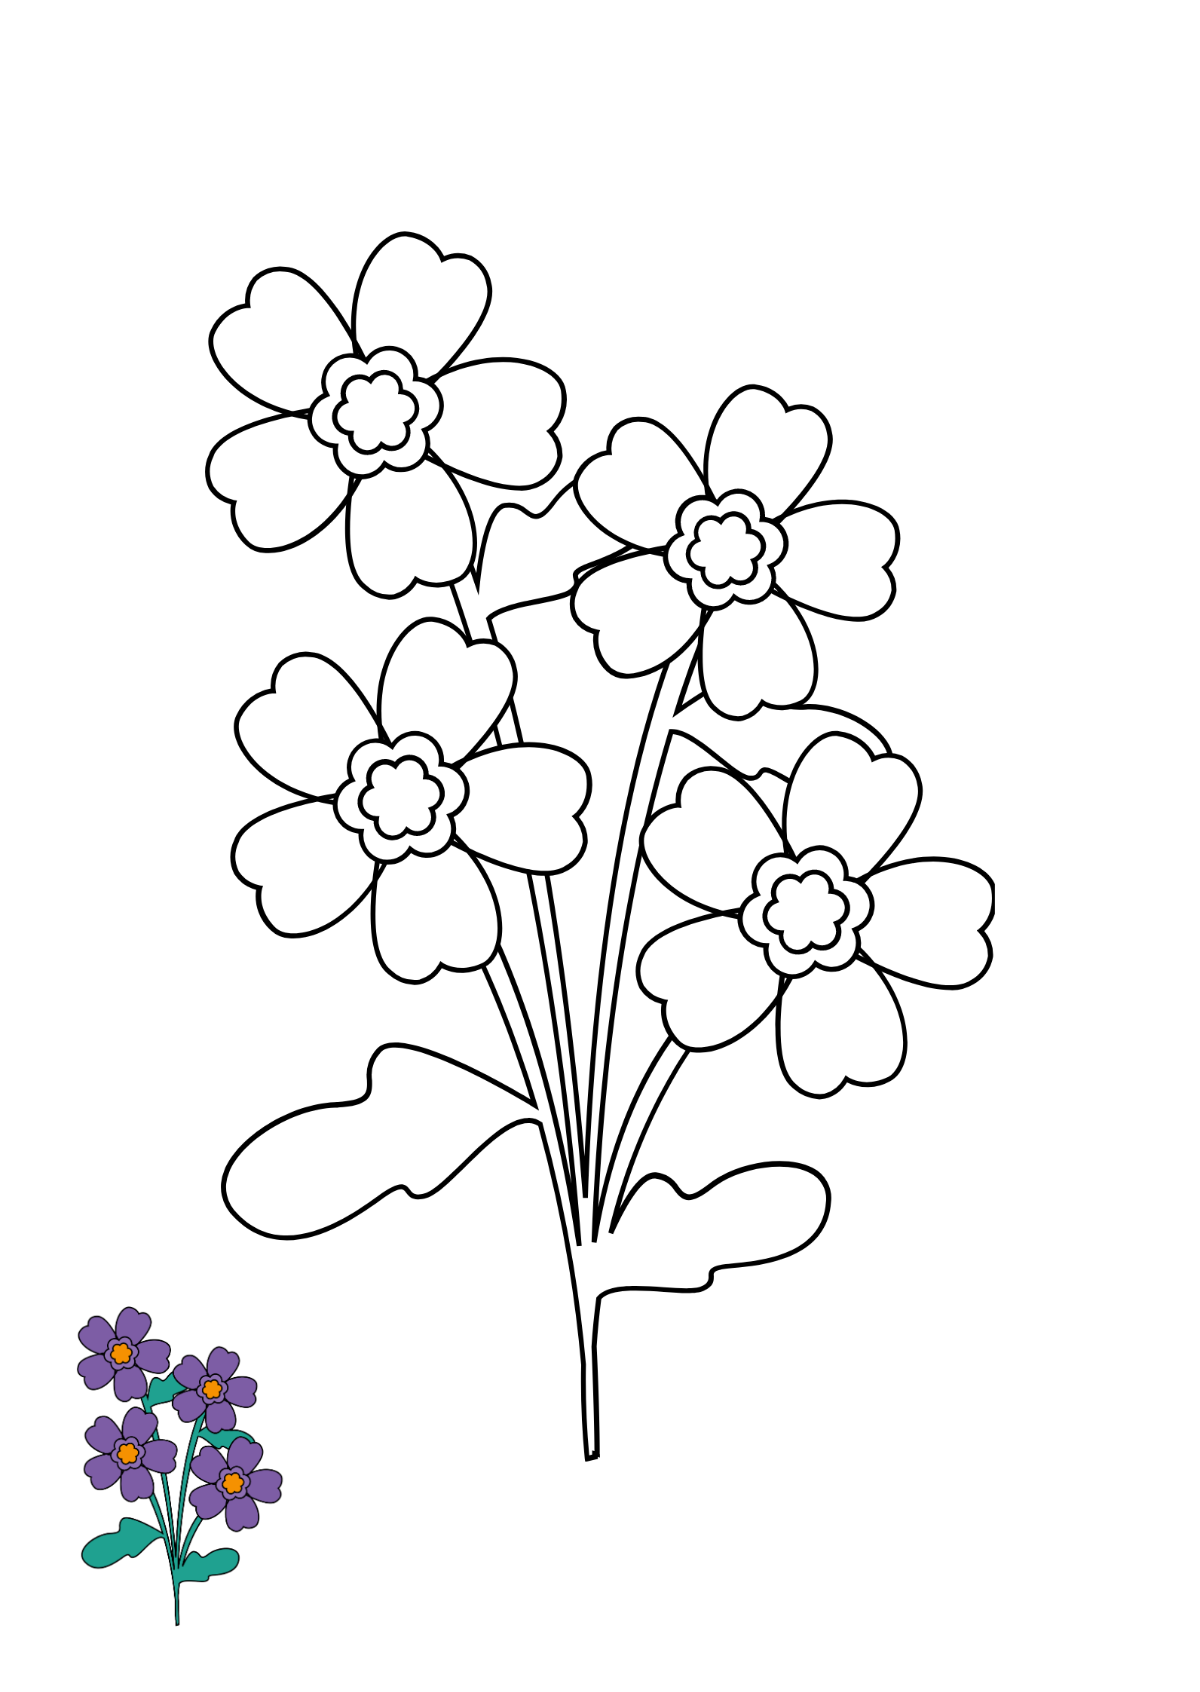 Watercolor Floral Coloring Page Template